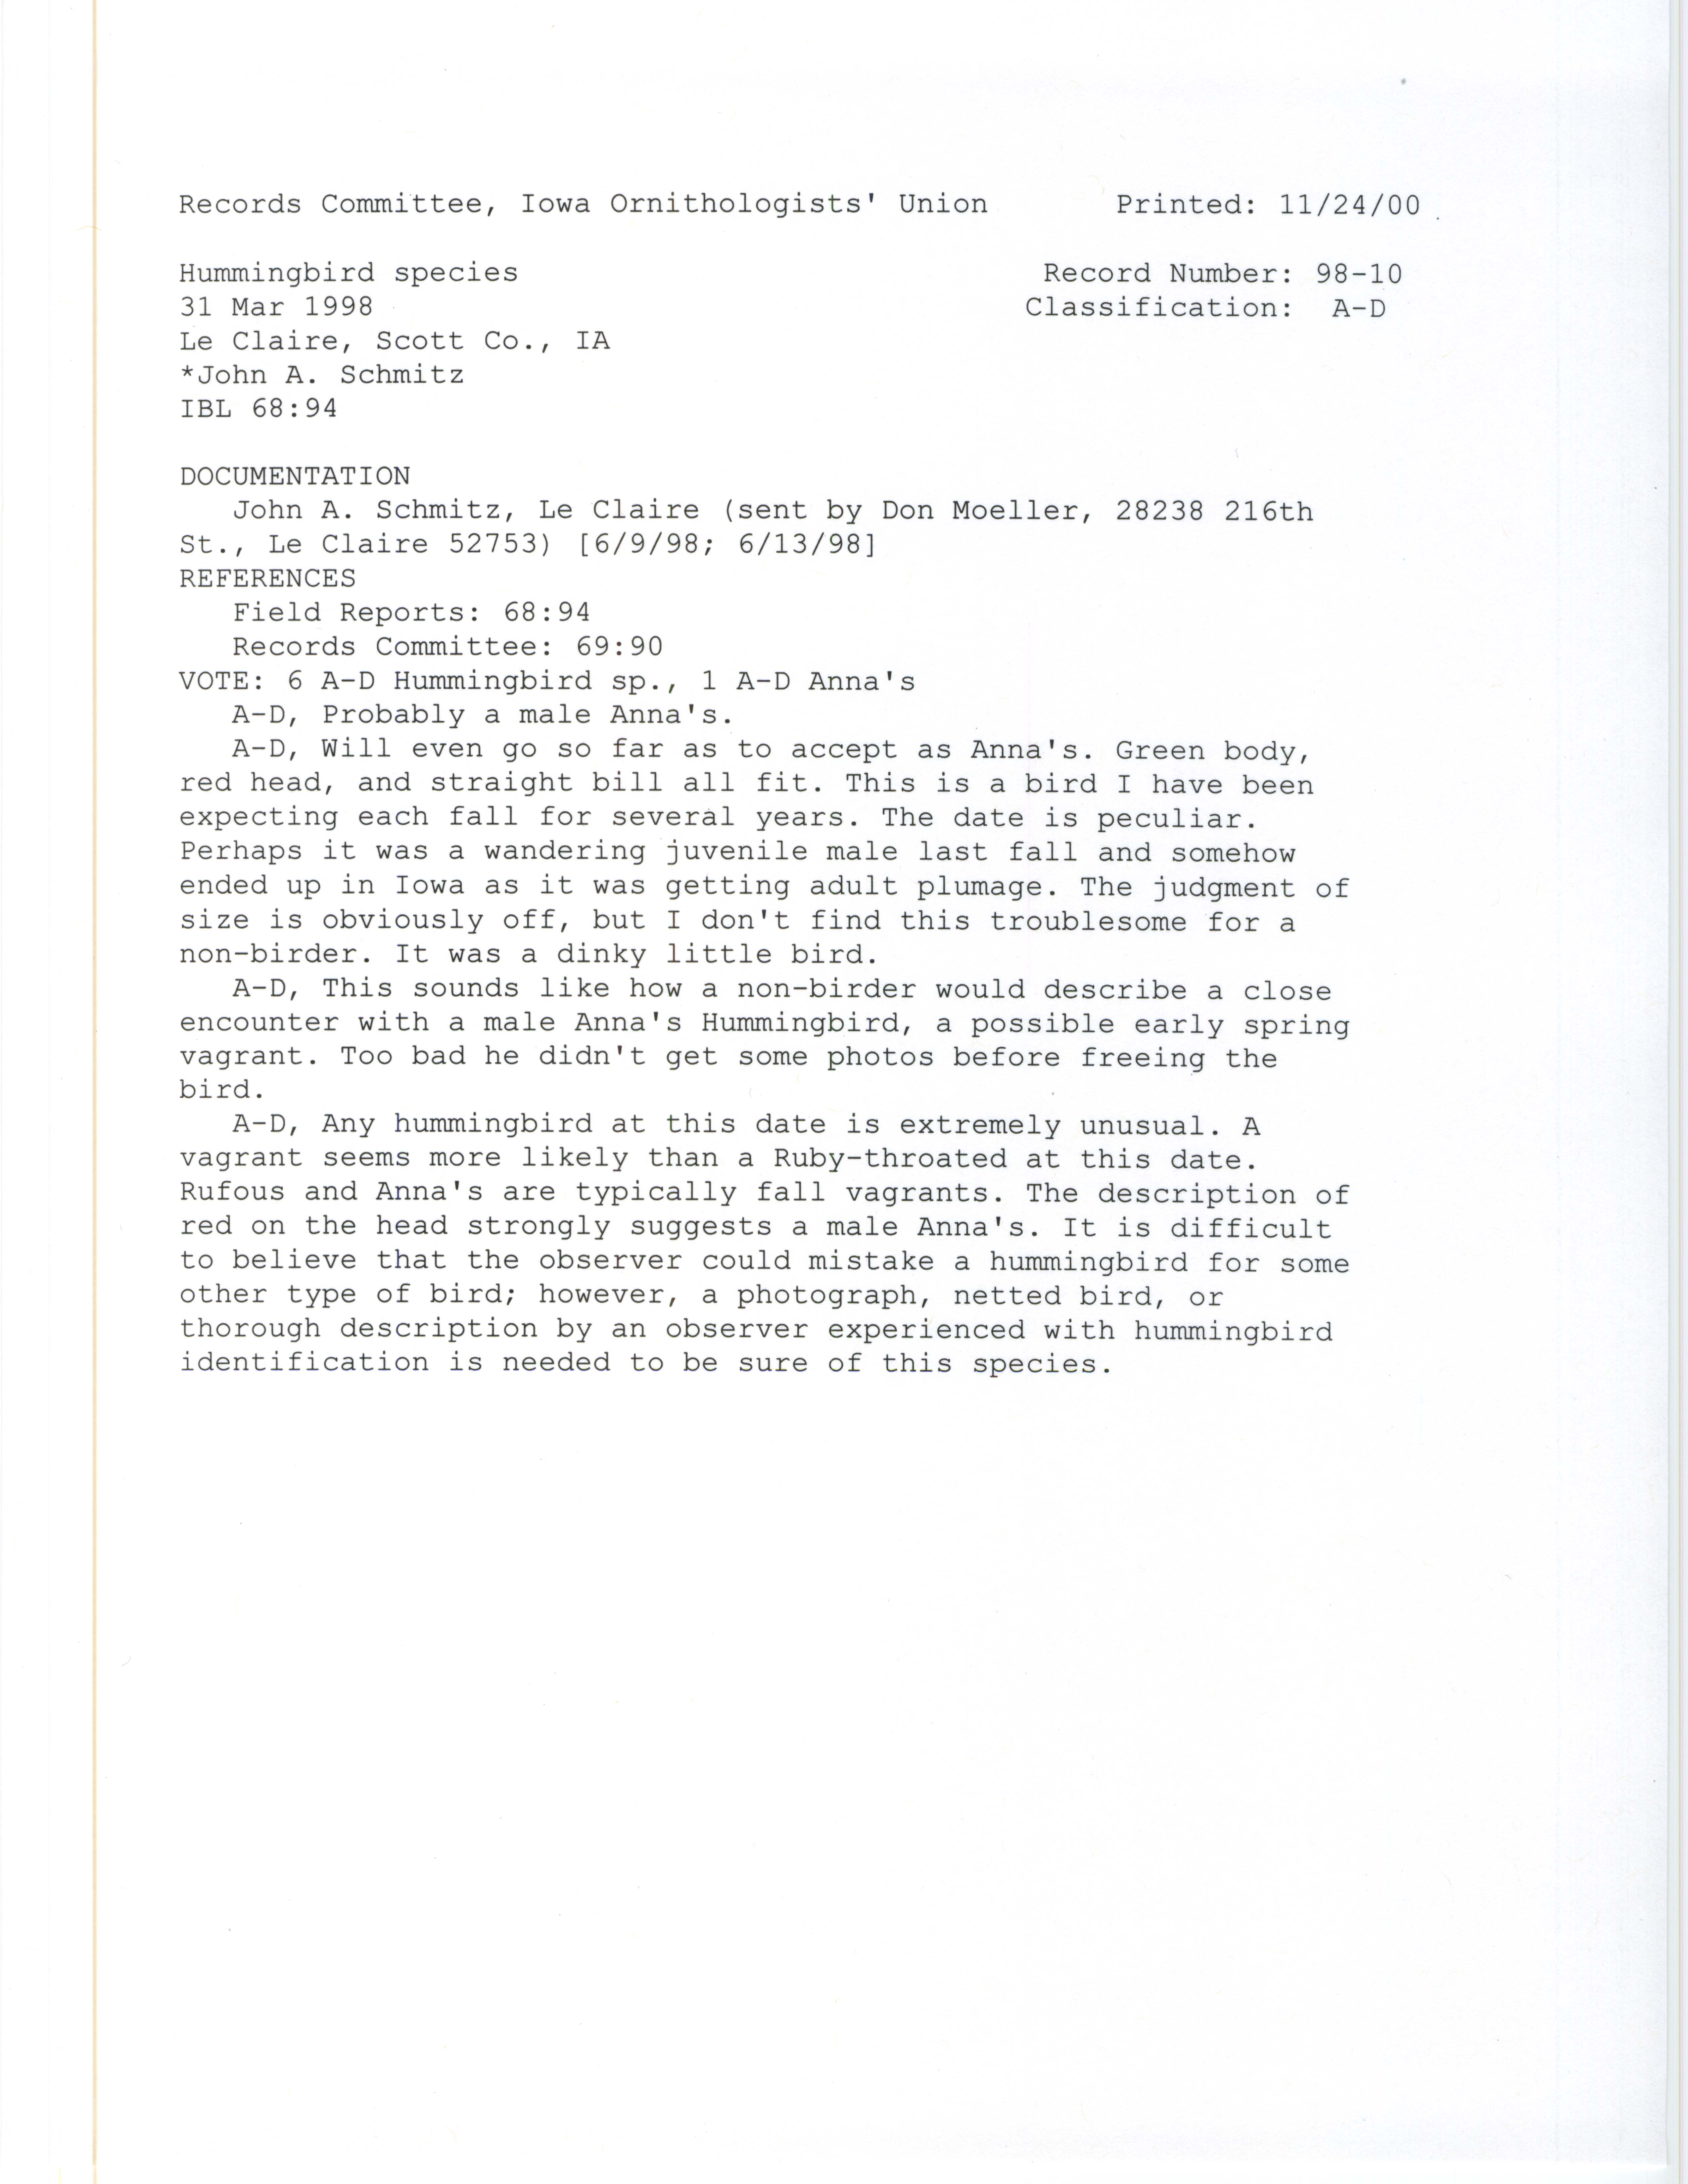 Records Committee review for rare bird sighting for a Hummingbird species in Le Claire, 1998